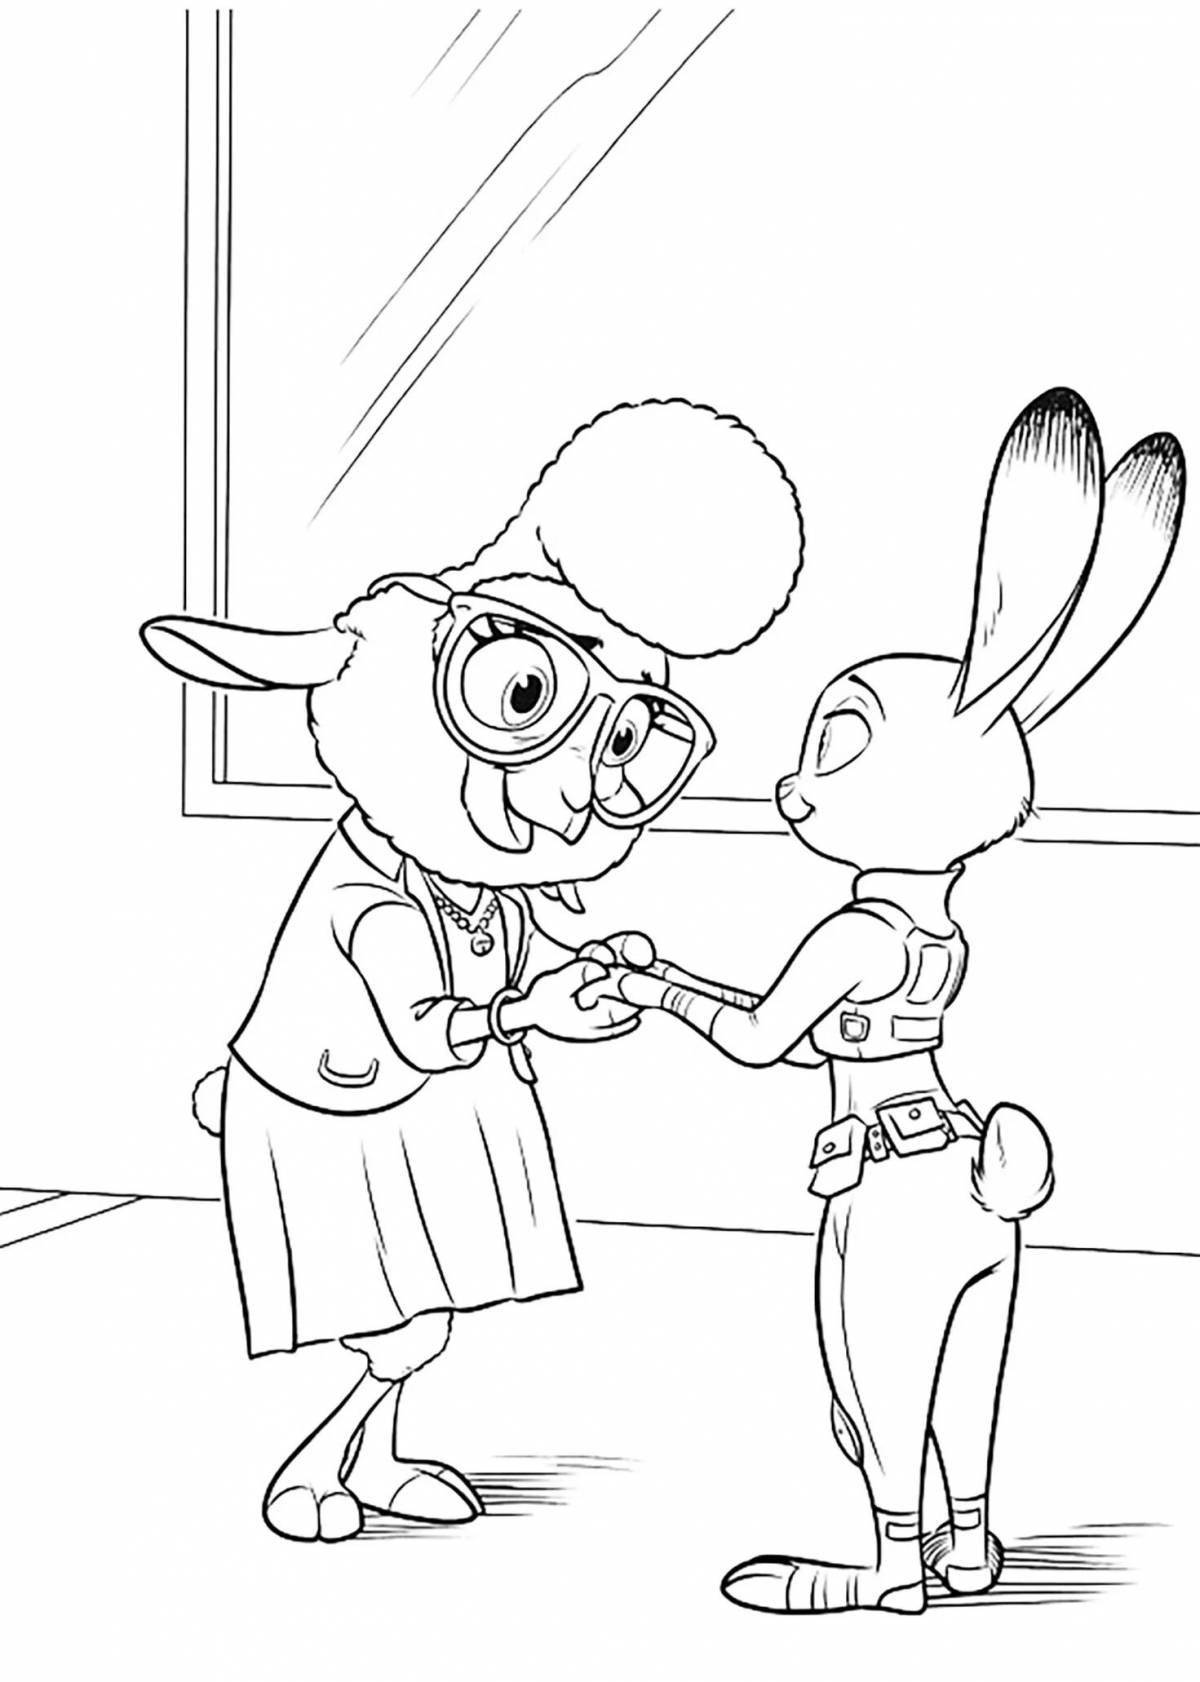 Exciting coloring judy hopps